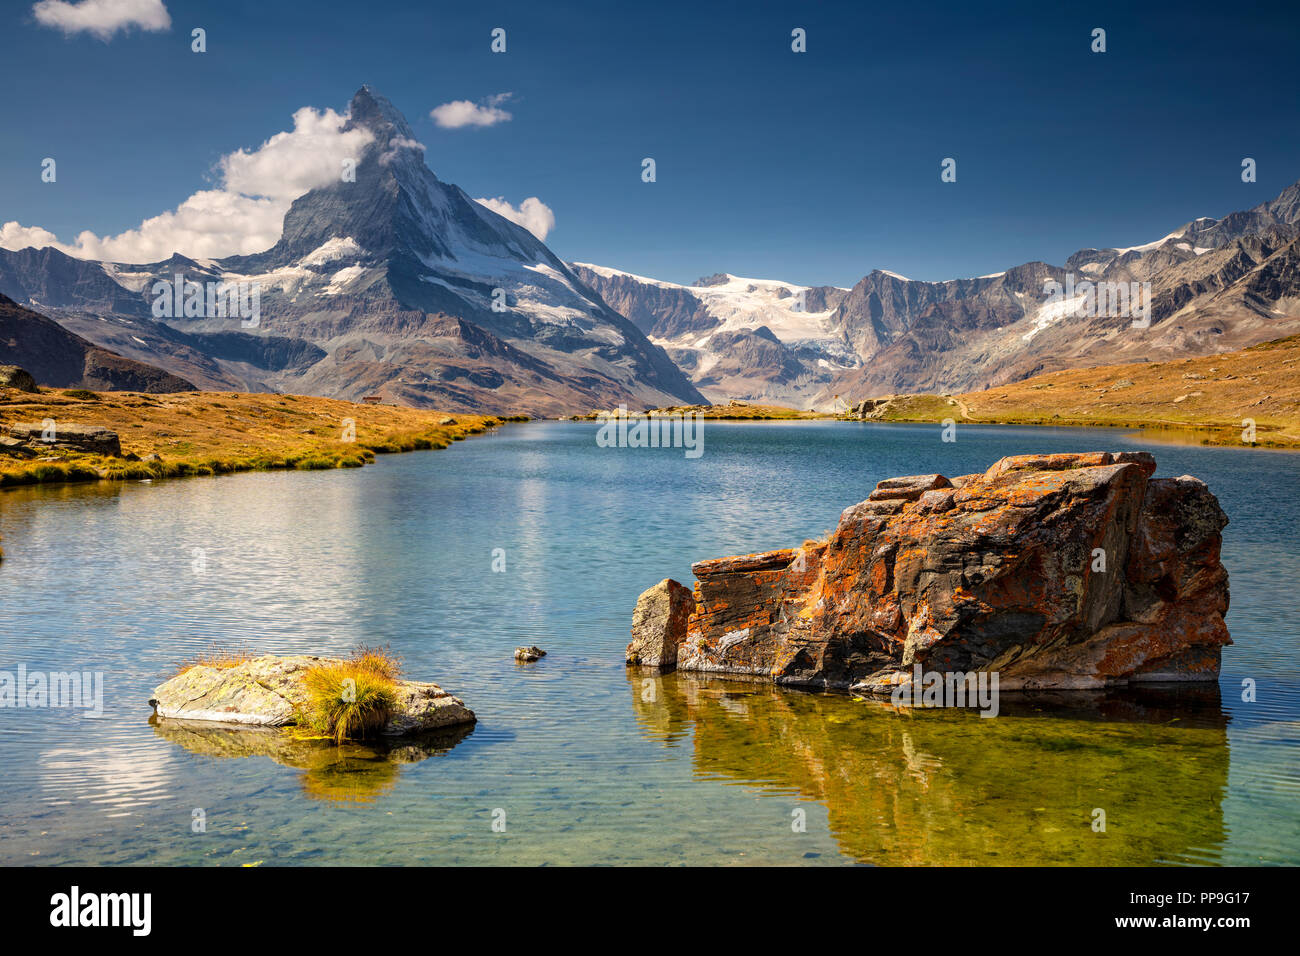 Swiss Alps. Landscape image of Swiss Alps with Stellisee and Matterhorn in the background. Stock Photo